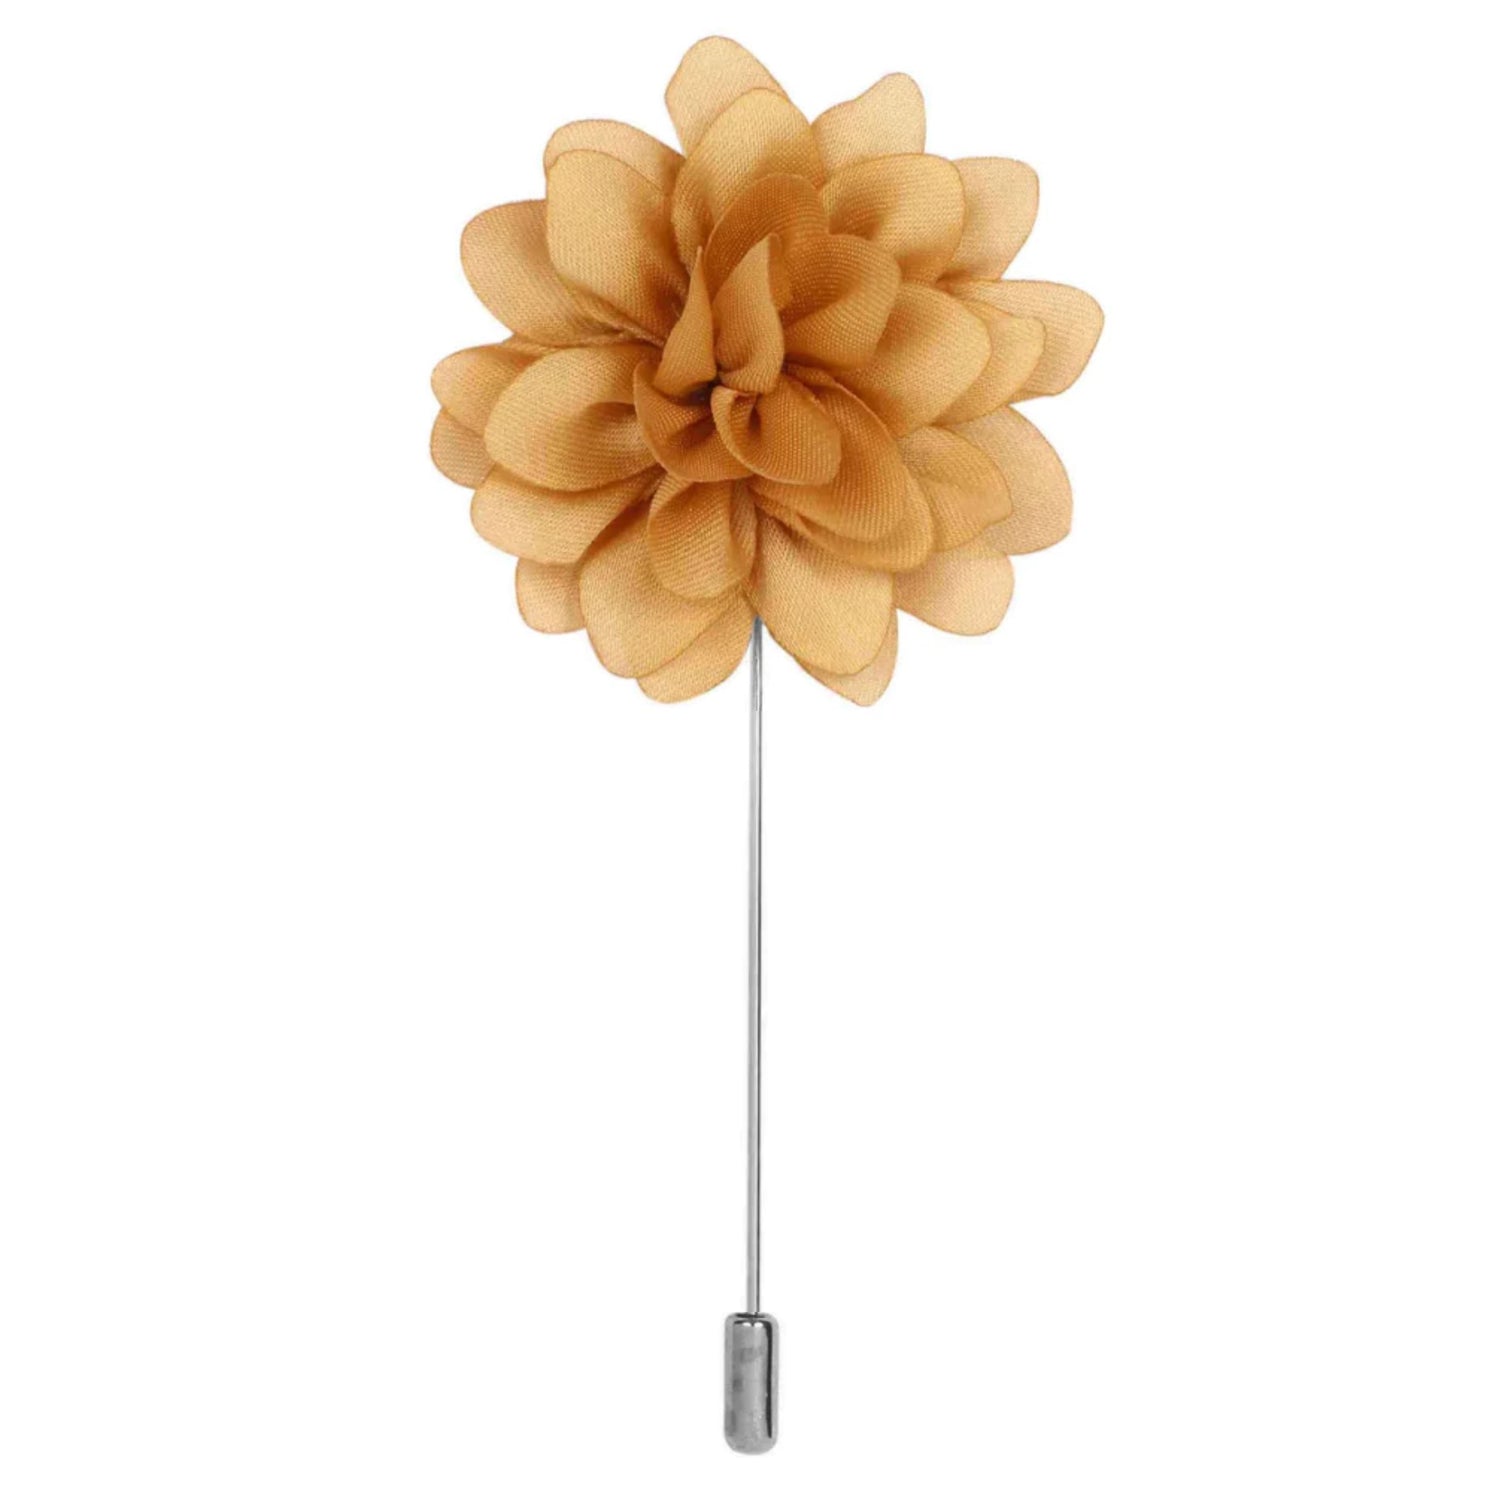 Main View: A Light Gold Color Star Flower Shaped Lapel Pin||Pale Gold